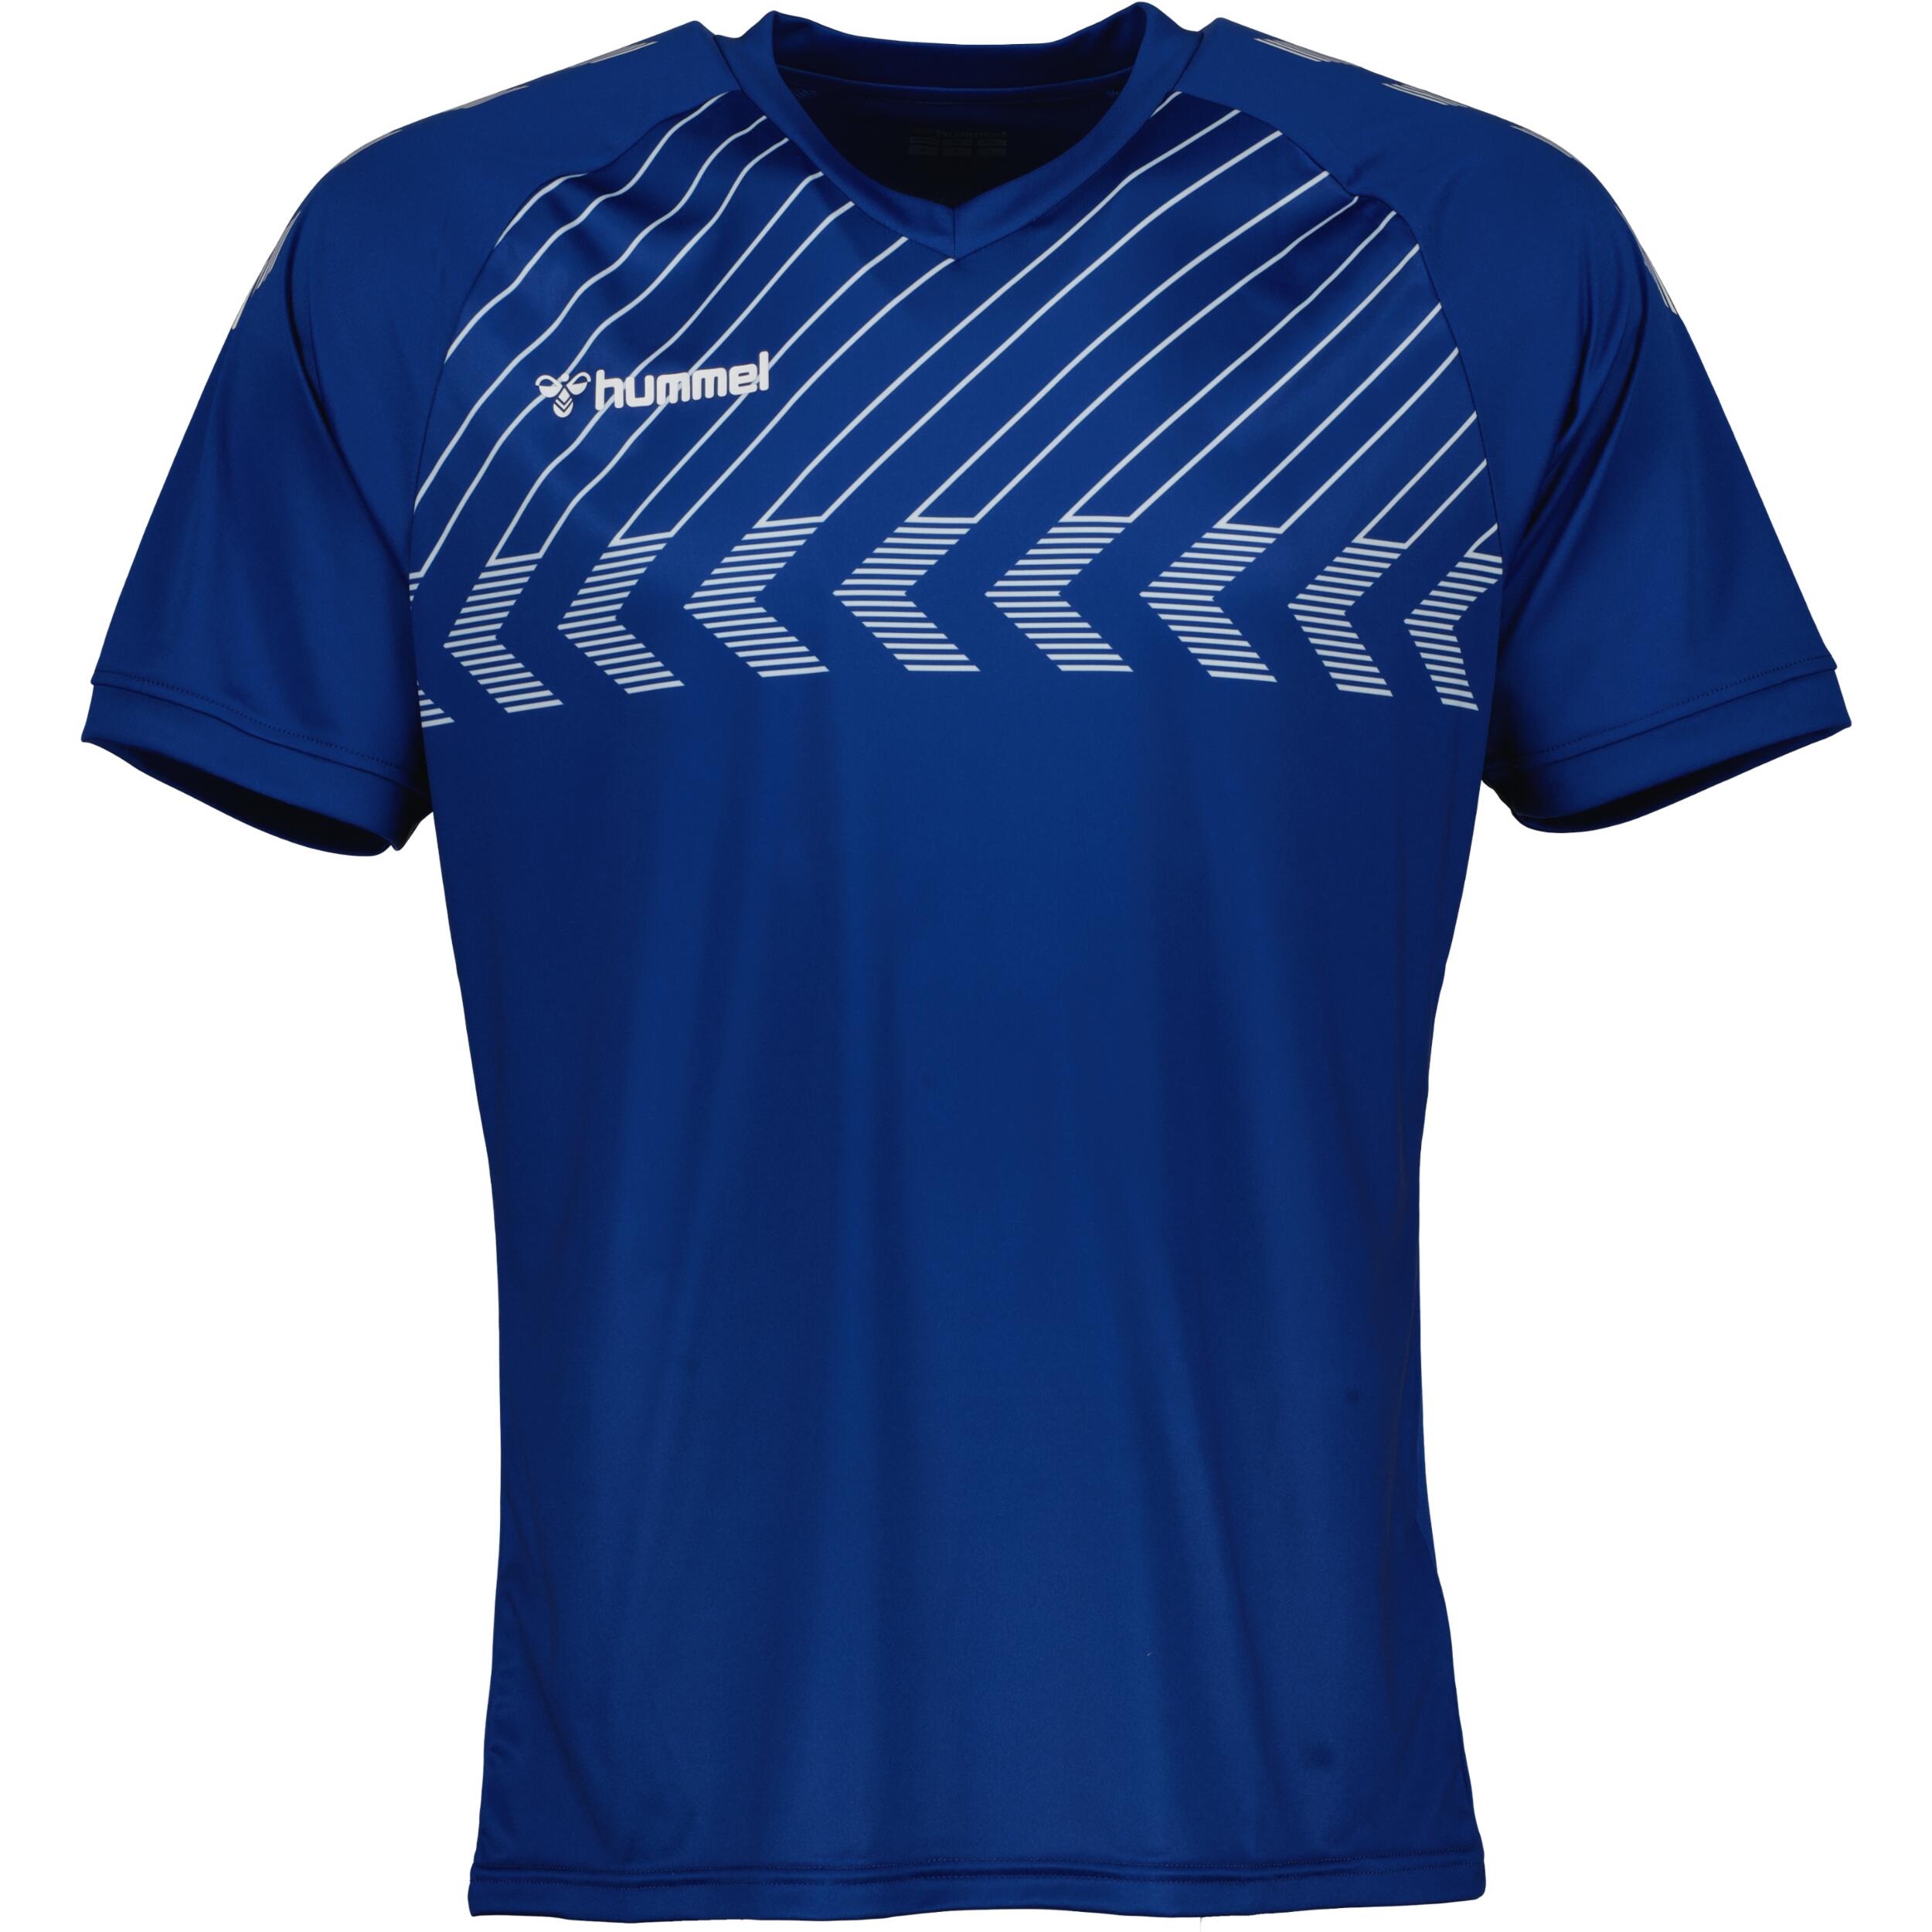 HUMMEL Poly jersey for men, great for football, in true blue